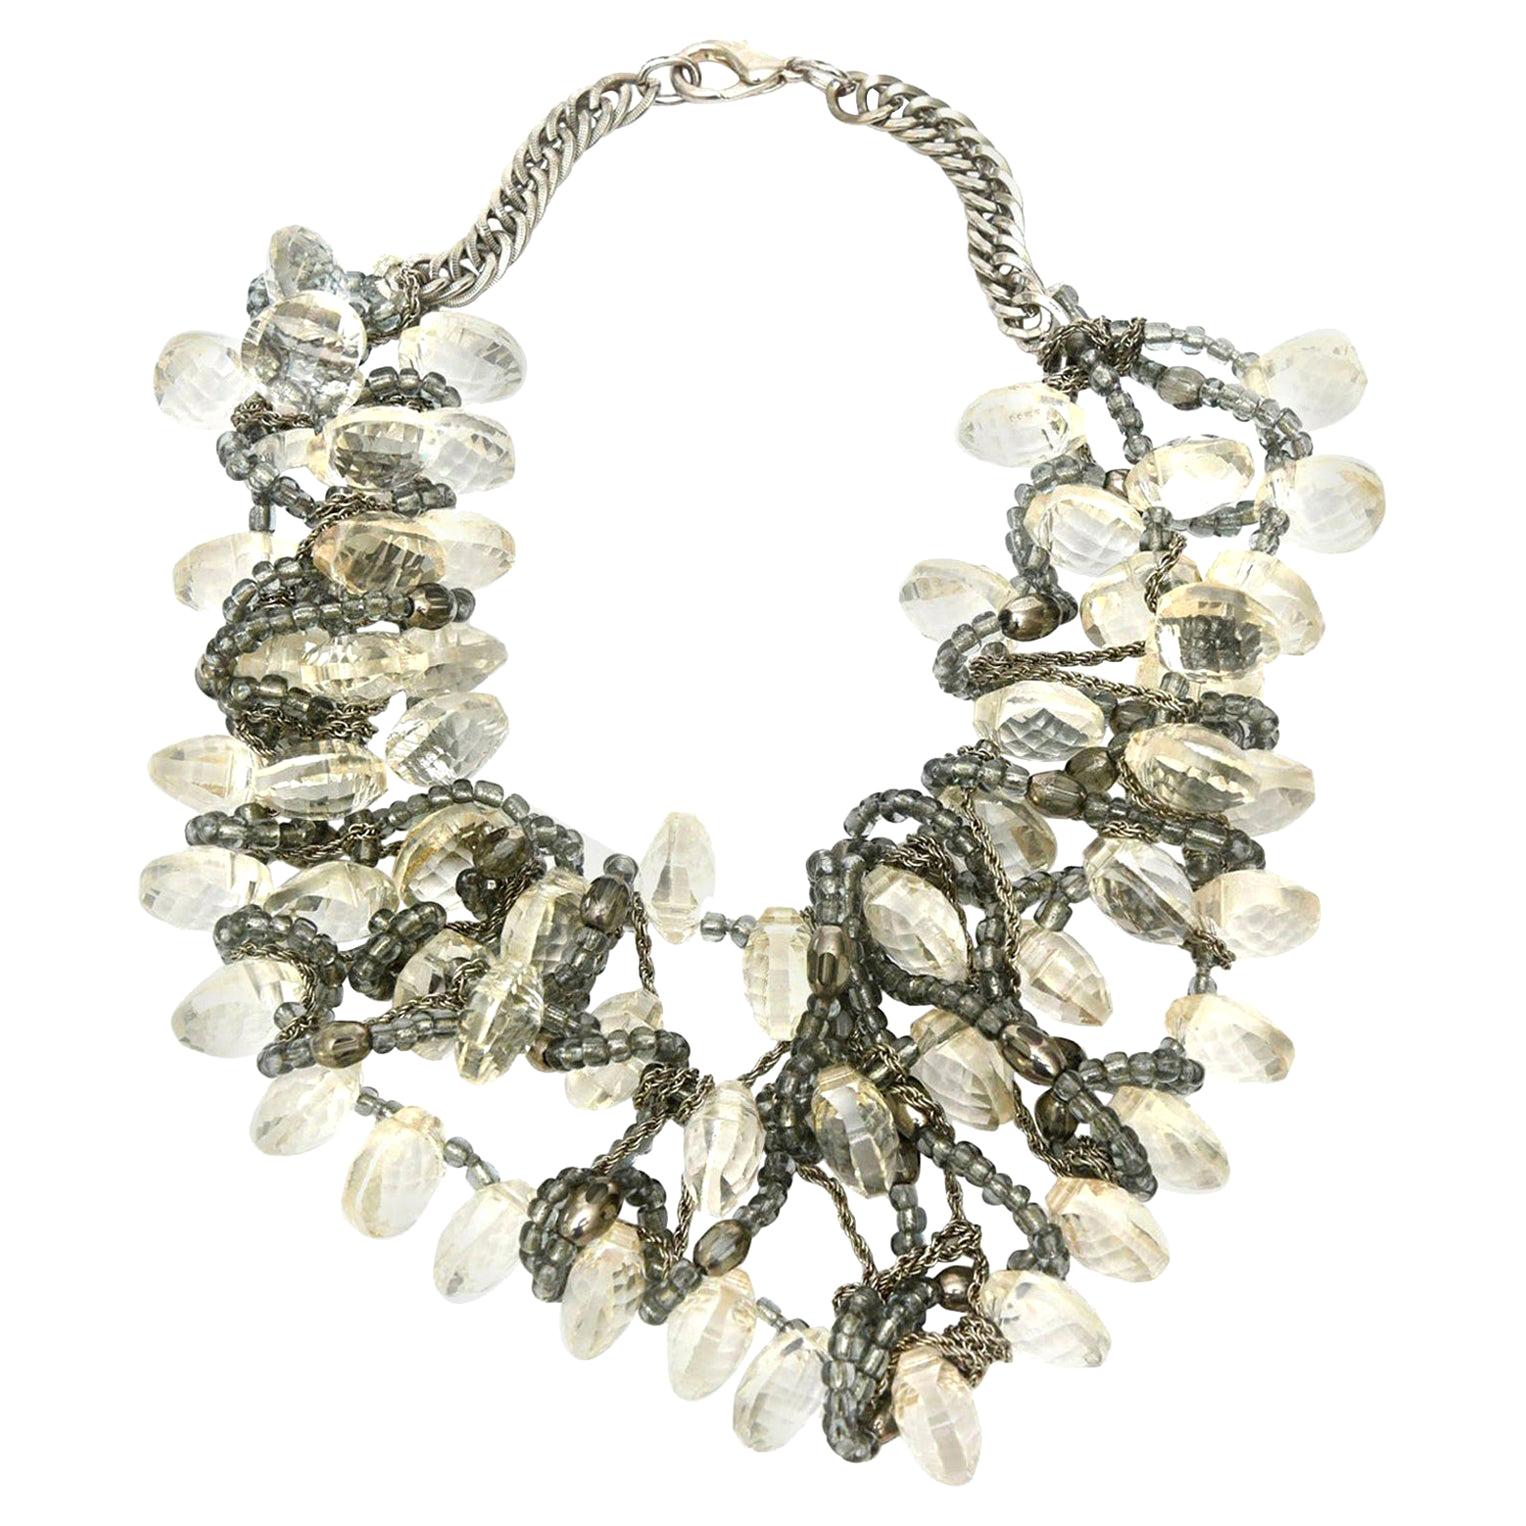  Faceted Lucite Chain, Beads And Silver Bib Multi Strand Necklace Vintage